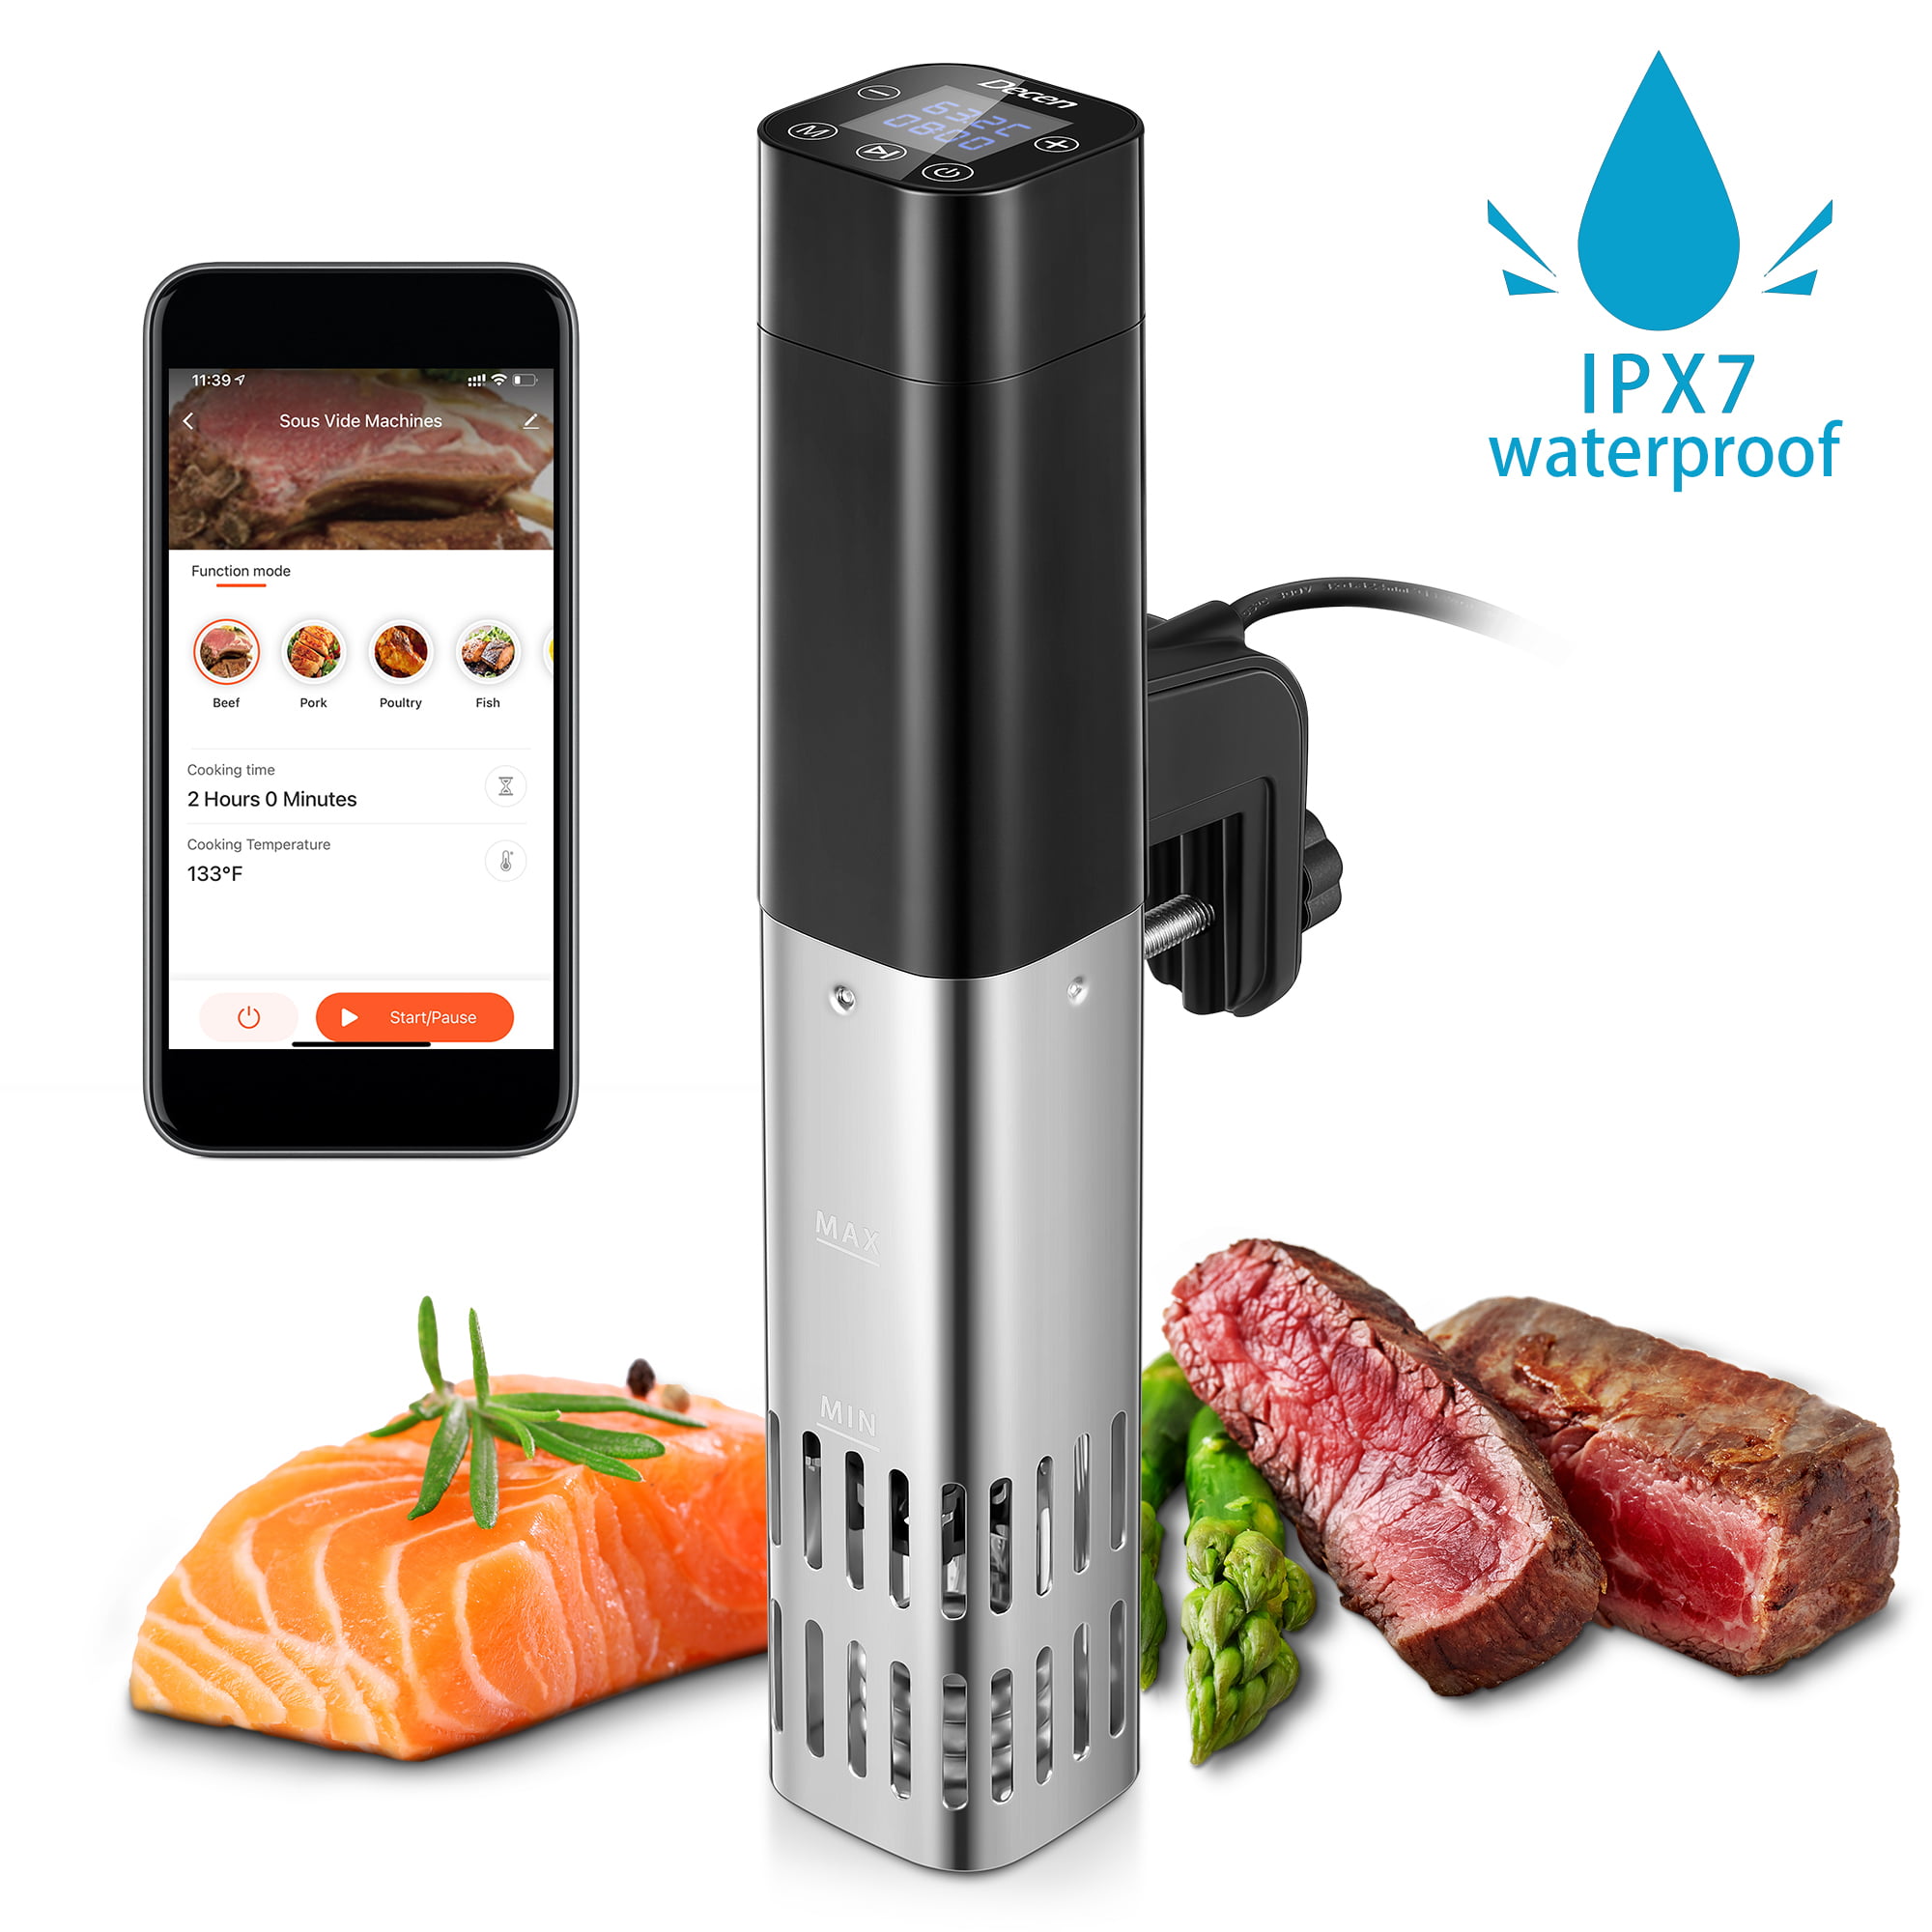 eggs. Fityou Sous Vide Cooker,Thermal Immersion Circulator with Recipe and Adjustable Clamp,1100 Watt Sous Vide Machine,Accurate Temperature Time Control Digital Display,Ultra Quiet,Ideal for Steak 